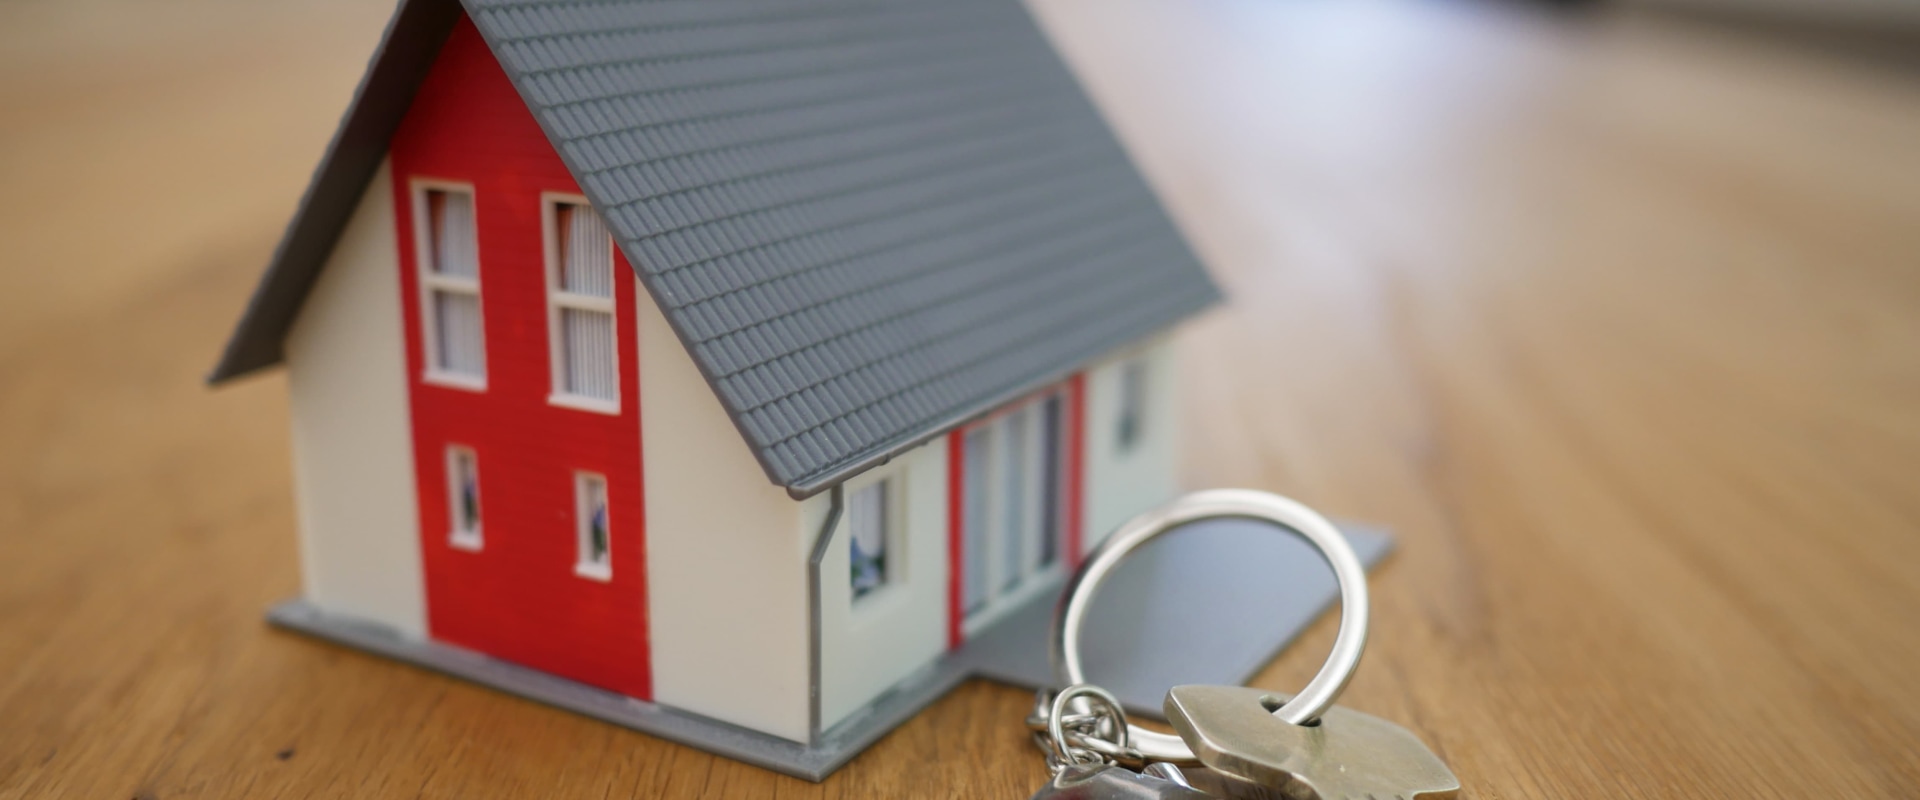 Can you buy mortgage insurance after closing?